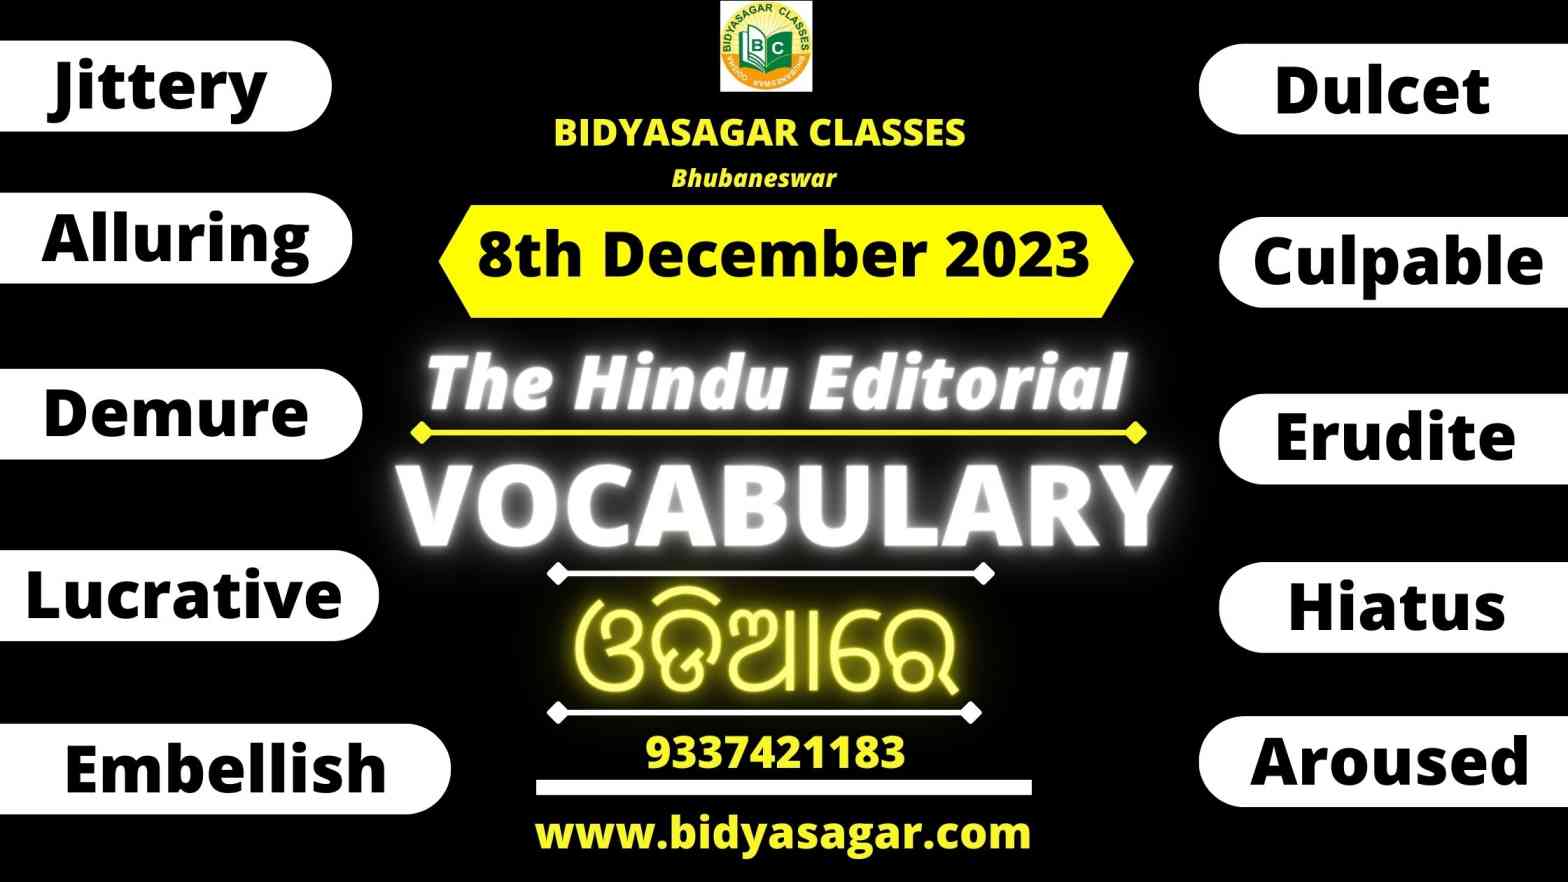 The Hindu Editorial Vocabulary of 8th December 2023